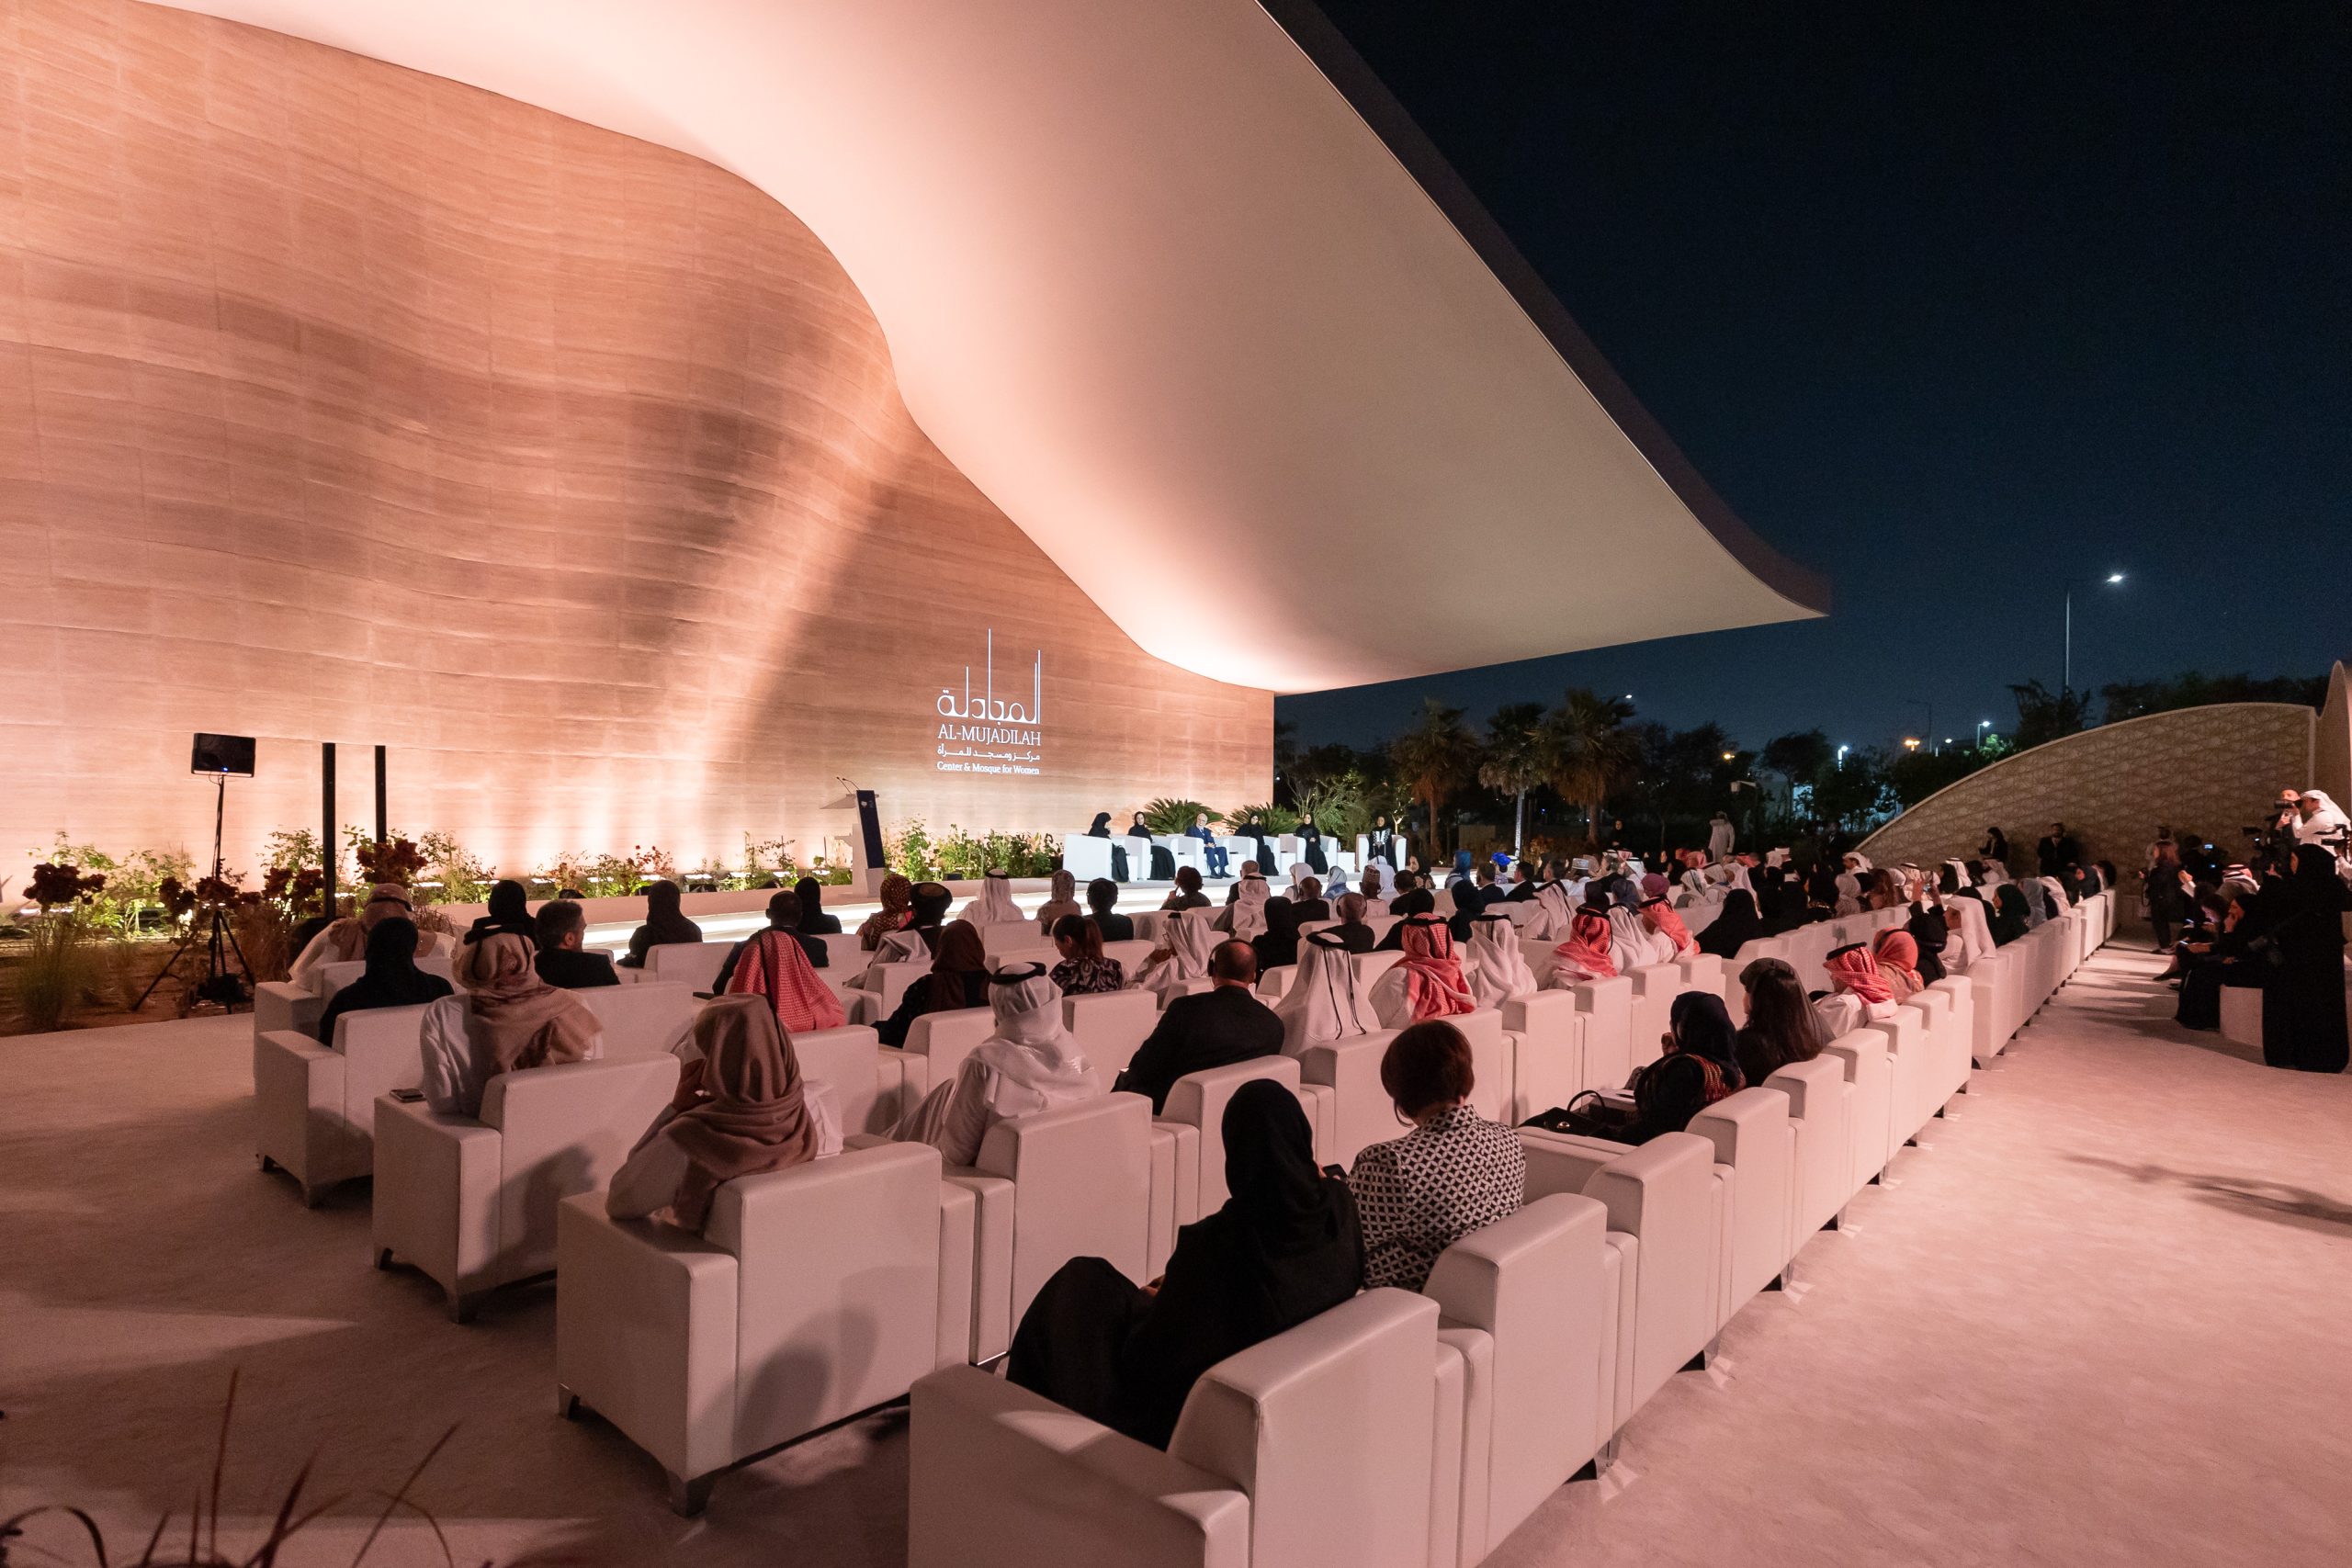 Seven things to do in Qatar this weekend (Dec. 14-17)